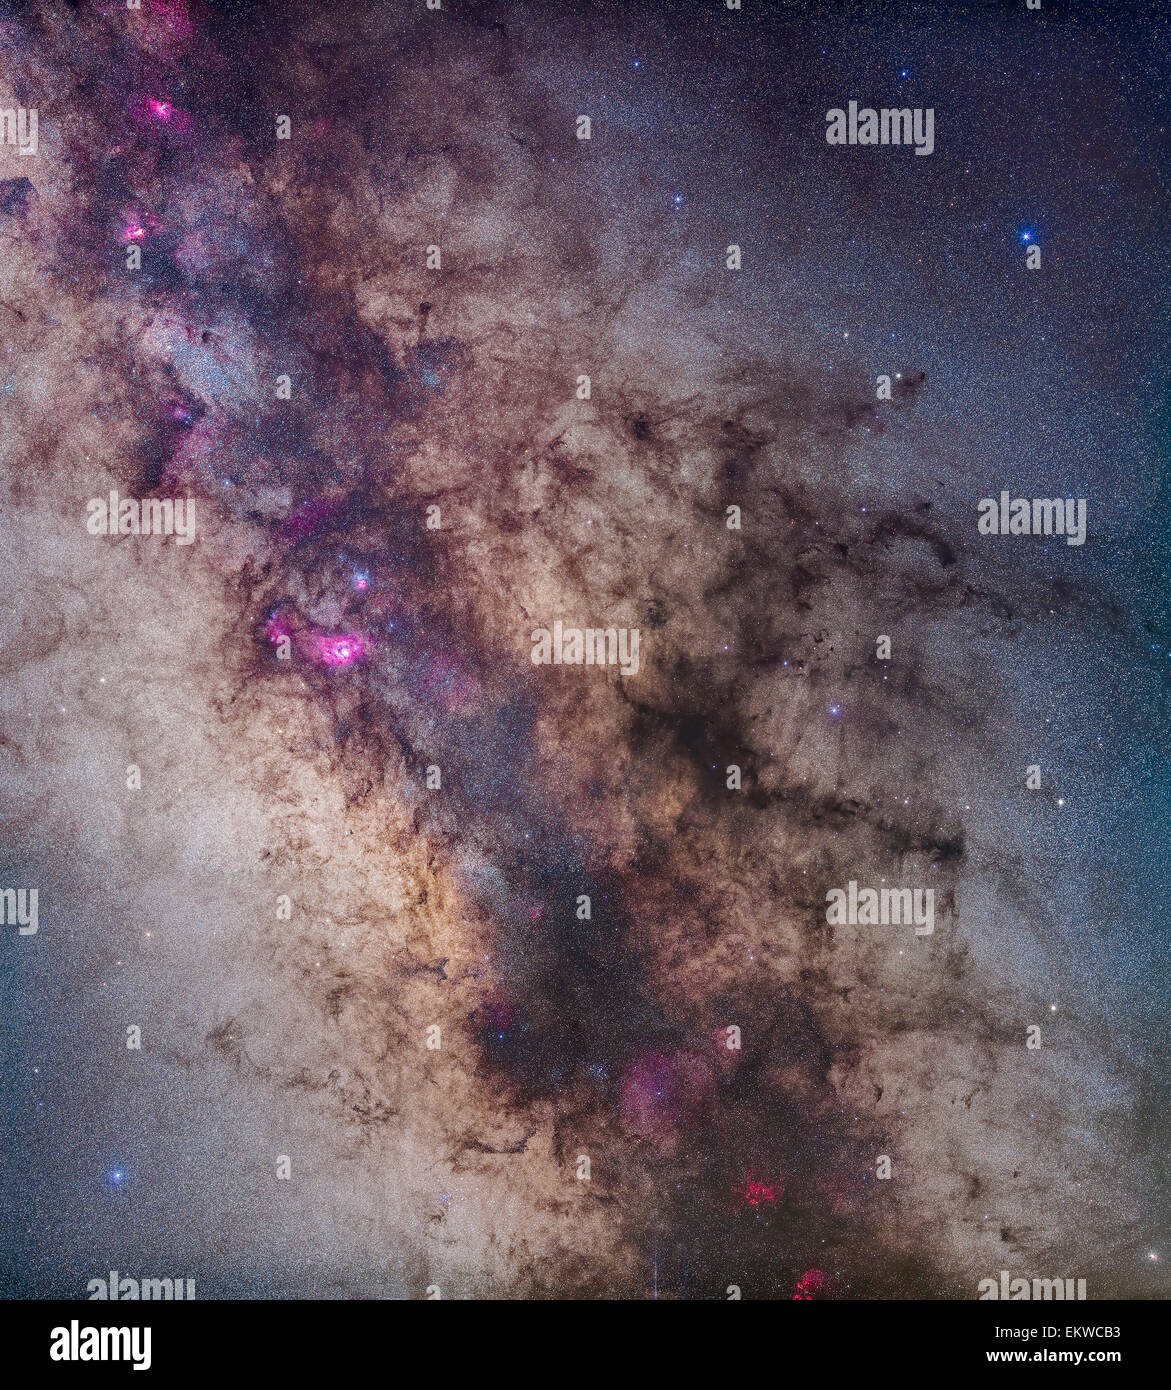 A mosaic of the region around the centre of the Milky Way in Sagittarius and Scorpius. The view takes in the Milky Way from the Stock Photo